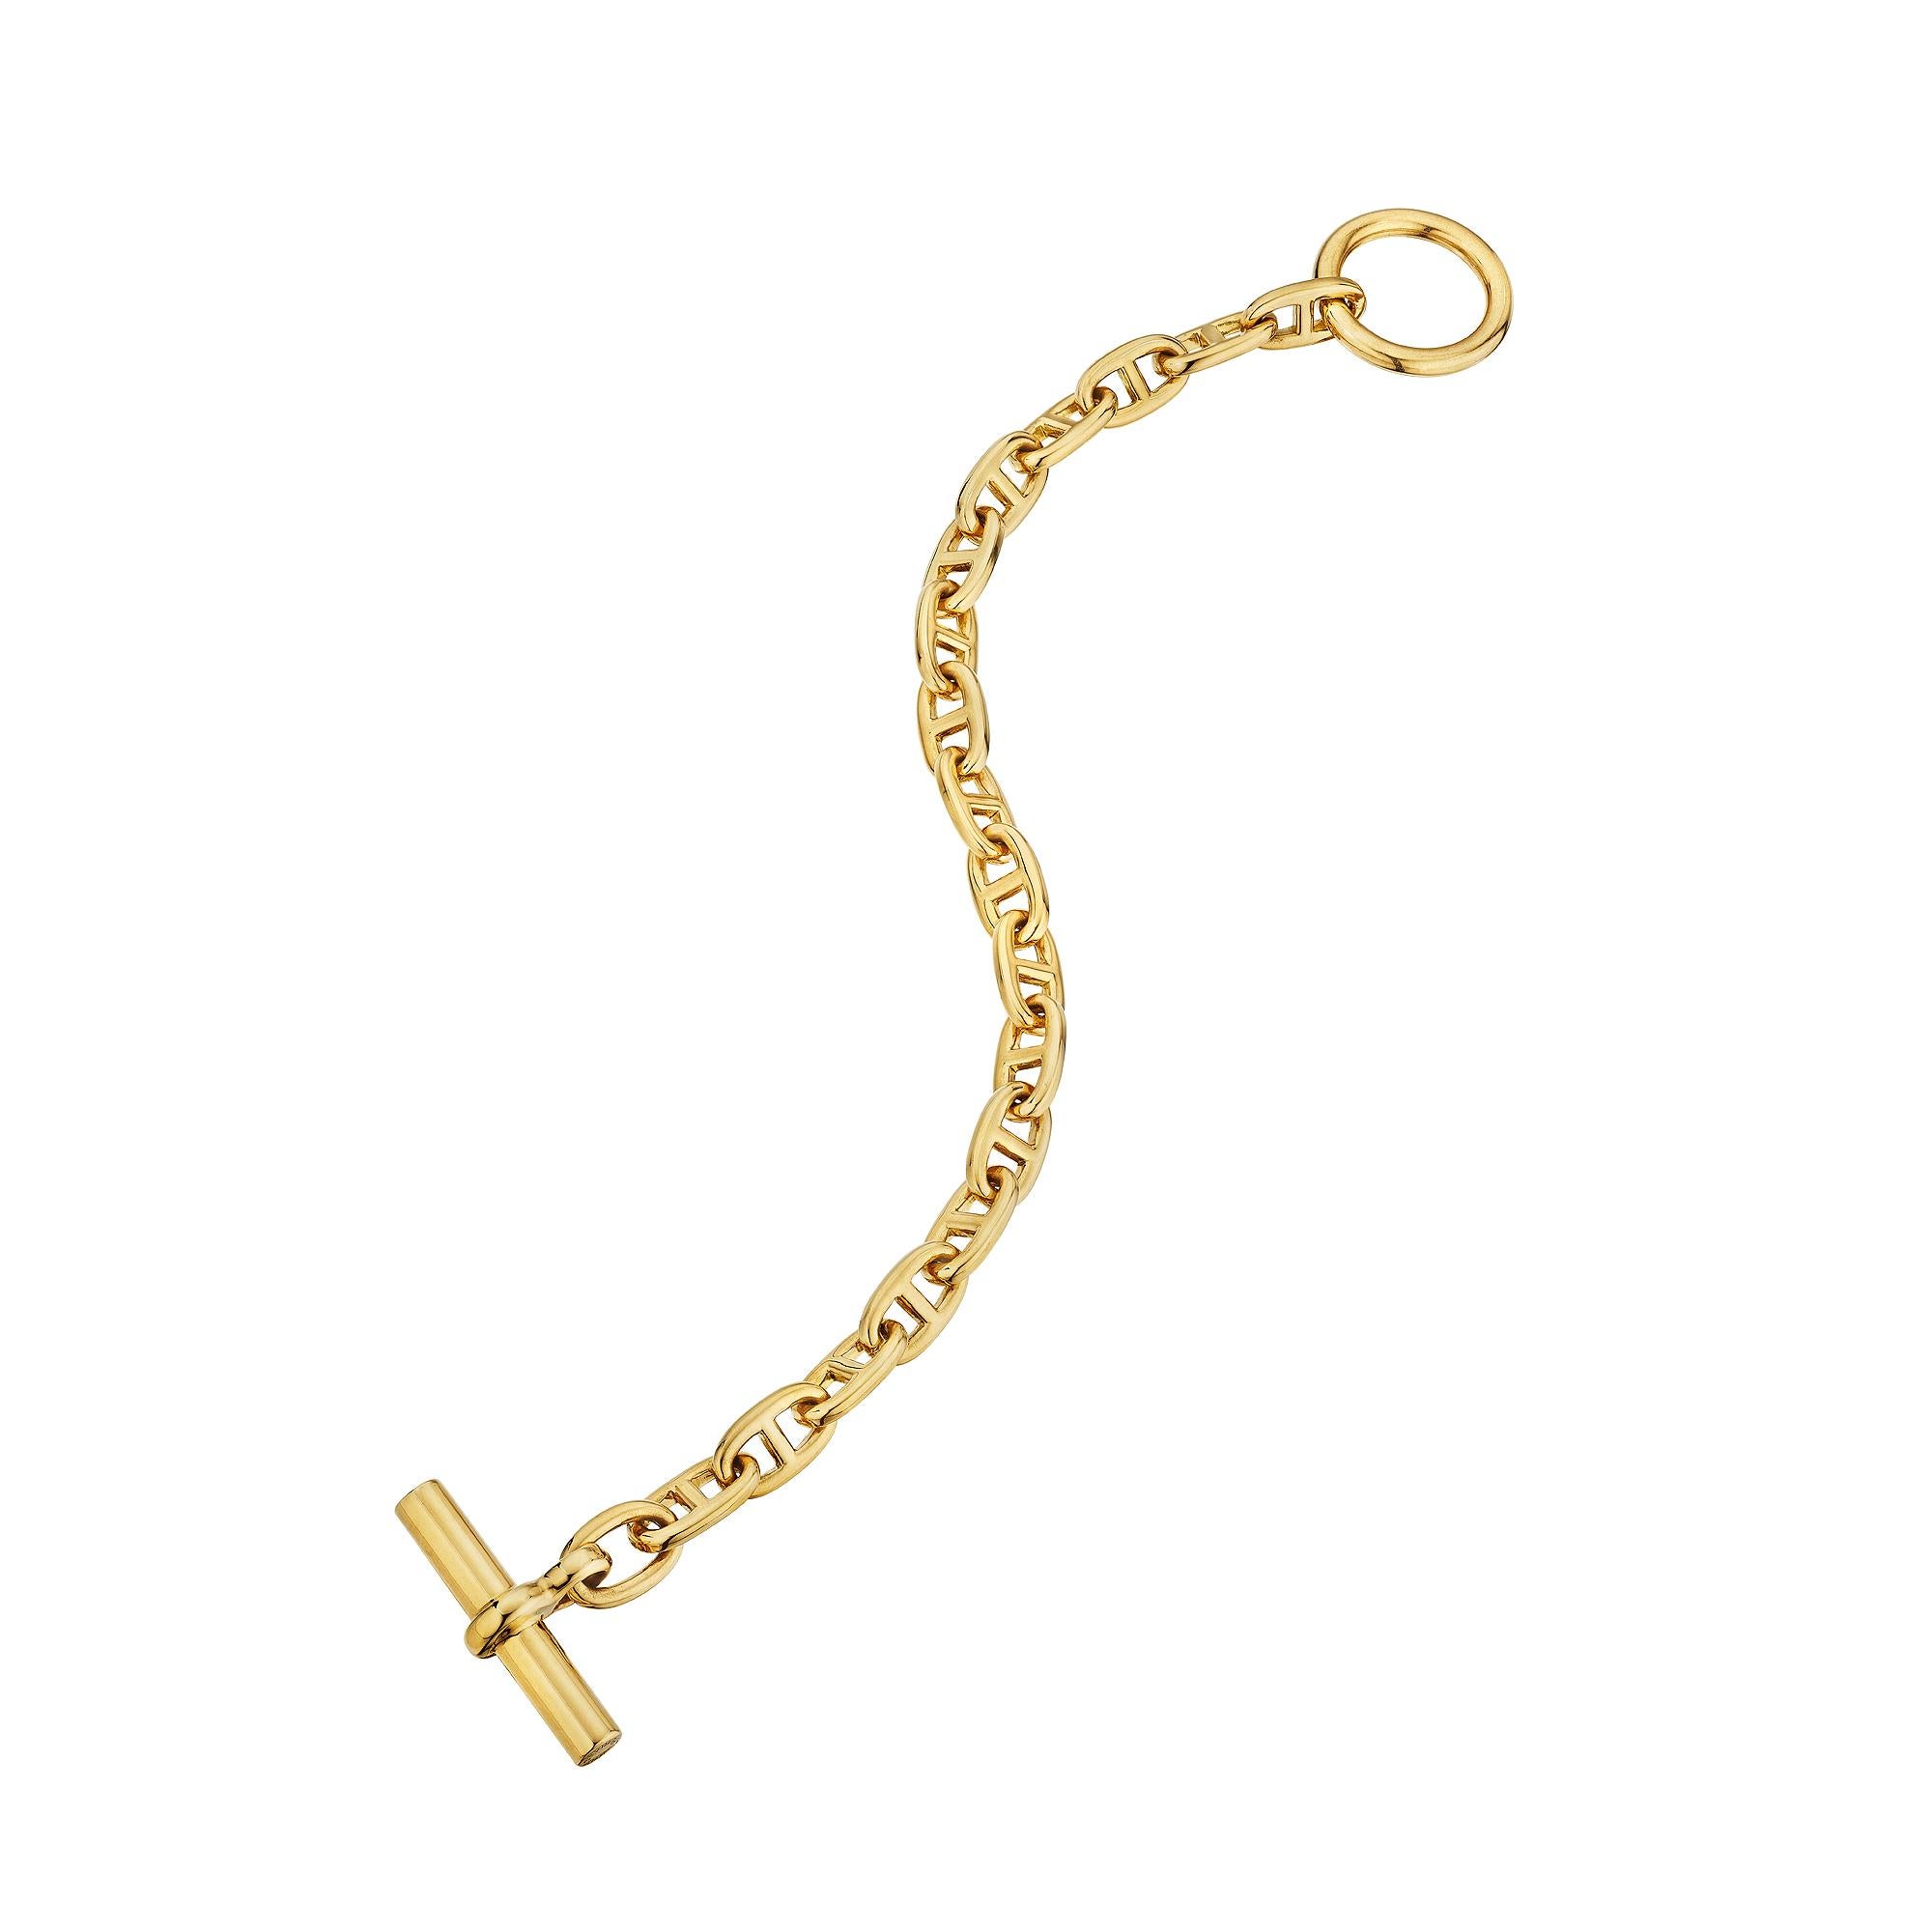 Bold and uncompromising this Hermes Paris modernist 'chaine d'ancre' small link toggle bracelet is the statement piece you have been searching for. With 17 links, this polished 18 karat yellow gold bracelet is extraordinarily collectible and utterly